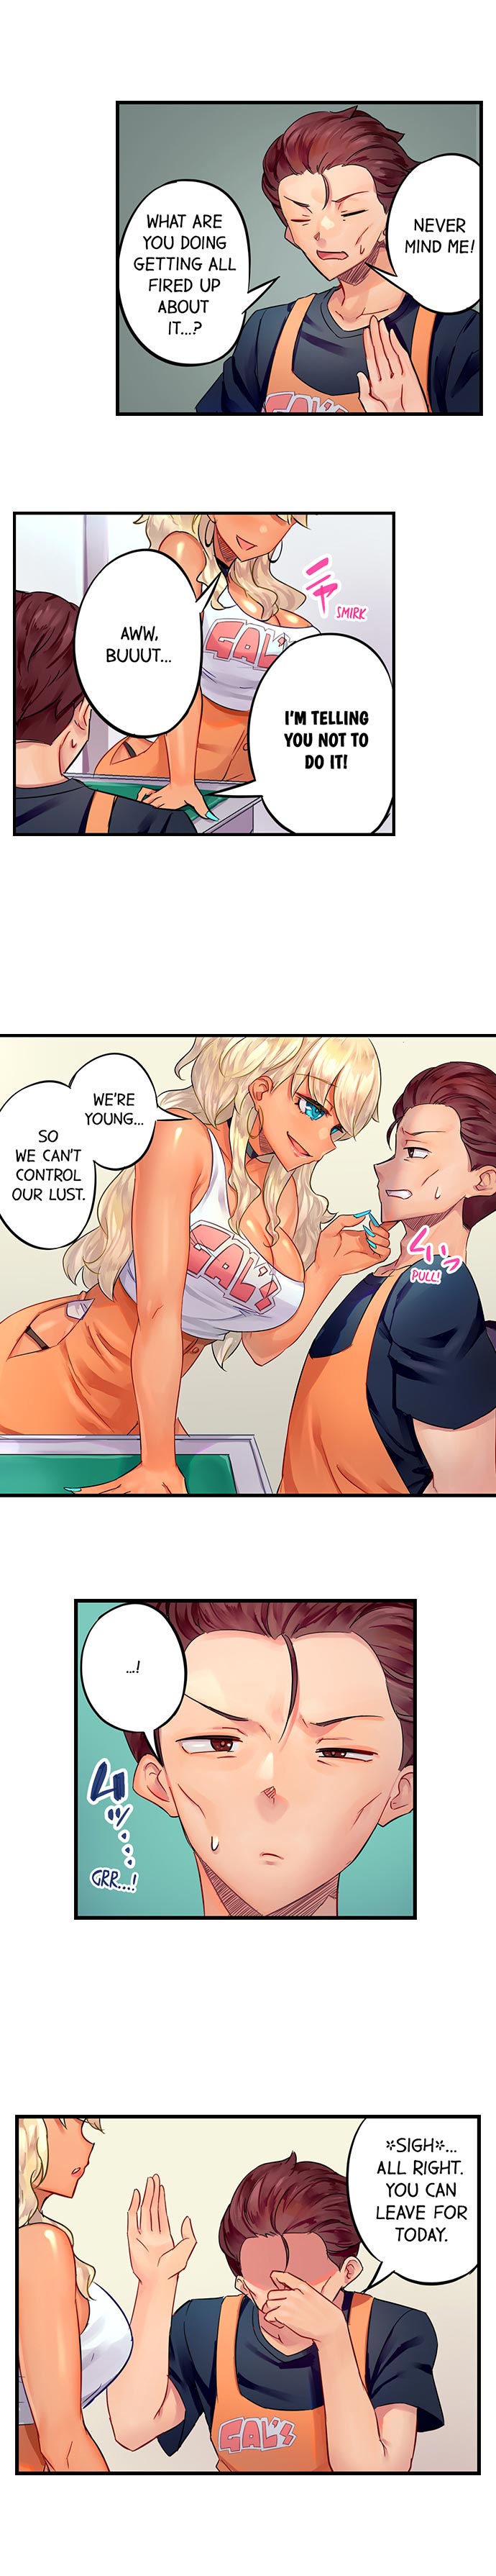 Orgasm Management for This Tanned Girl - Chapter 1 Page 8